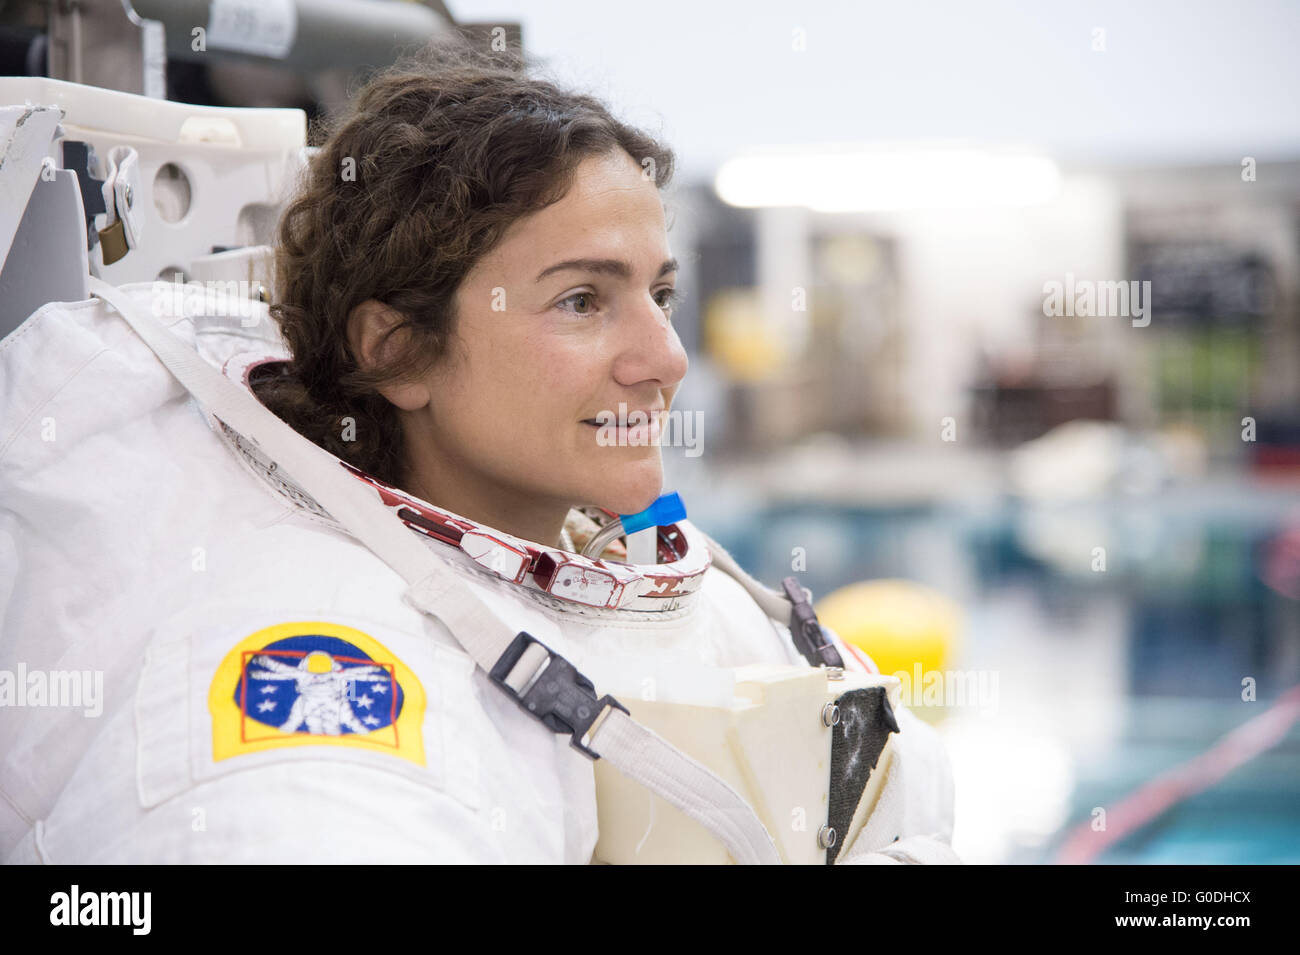 NASA astronaut Jessica Meir in her Extravehicular Mobility Unit space suit during ISS EVA training at the Neutral Buoyancy Laboratory Johnson Space Center October 27, 2014 in Houston, Texas. Stock Photo